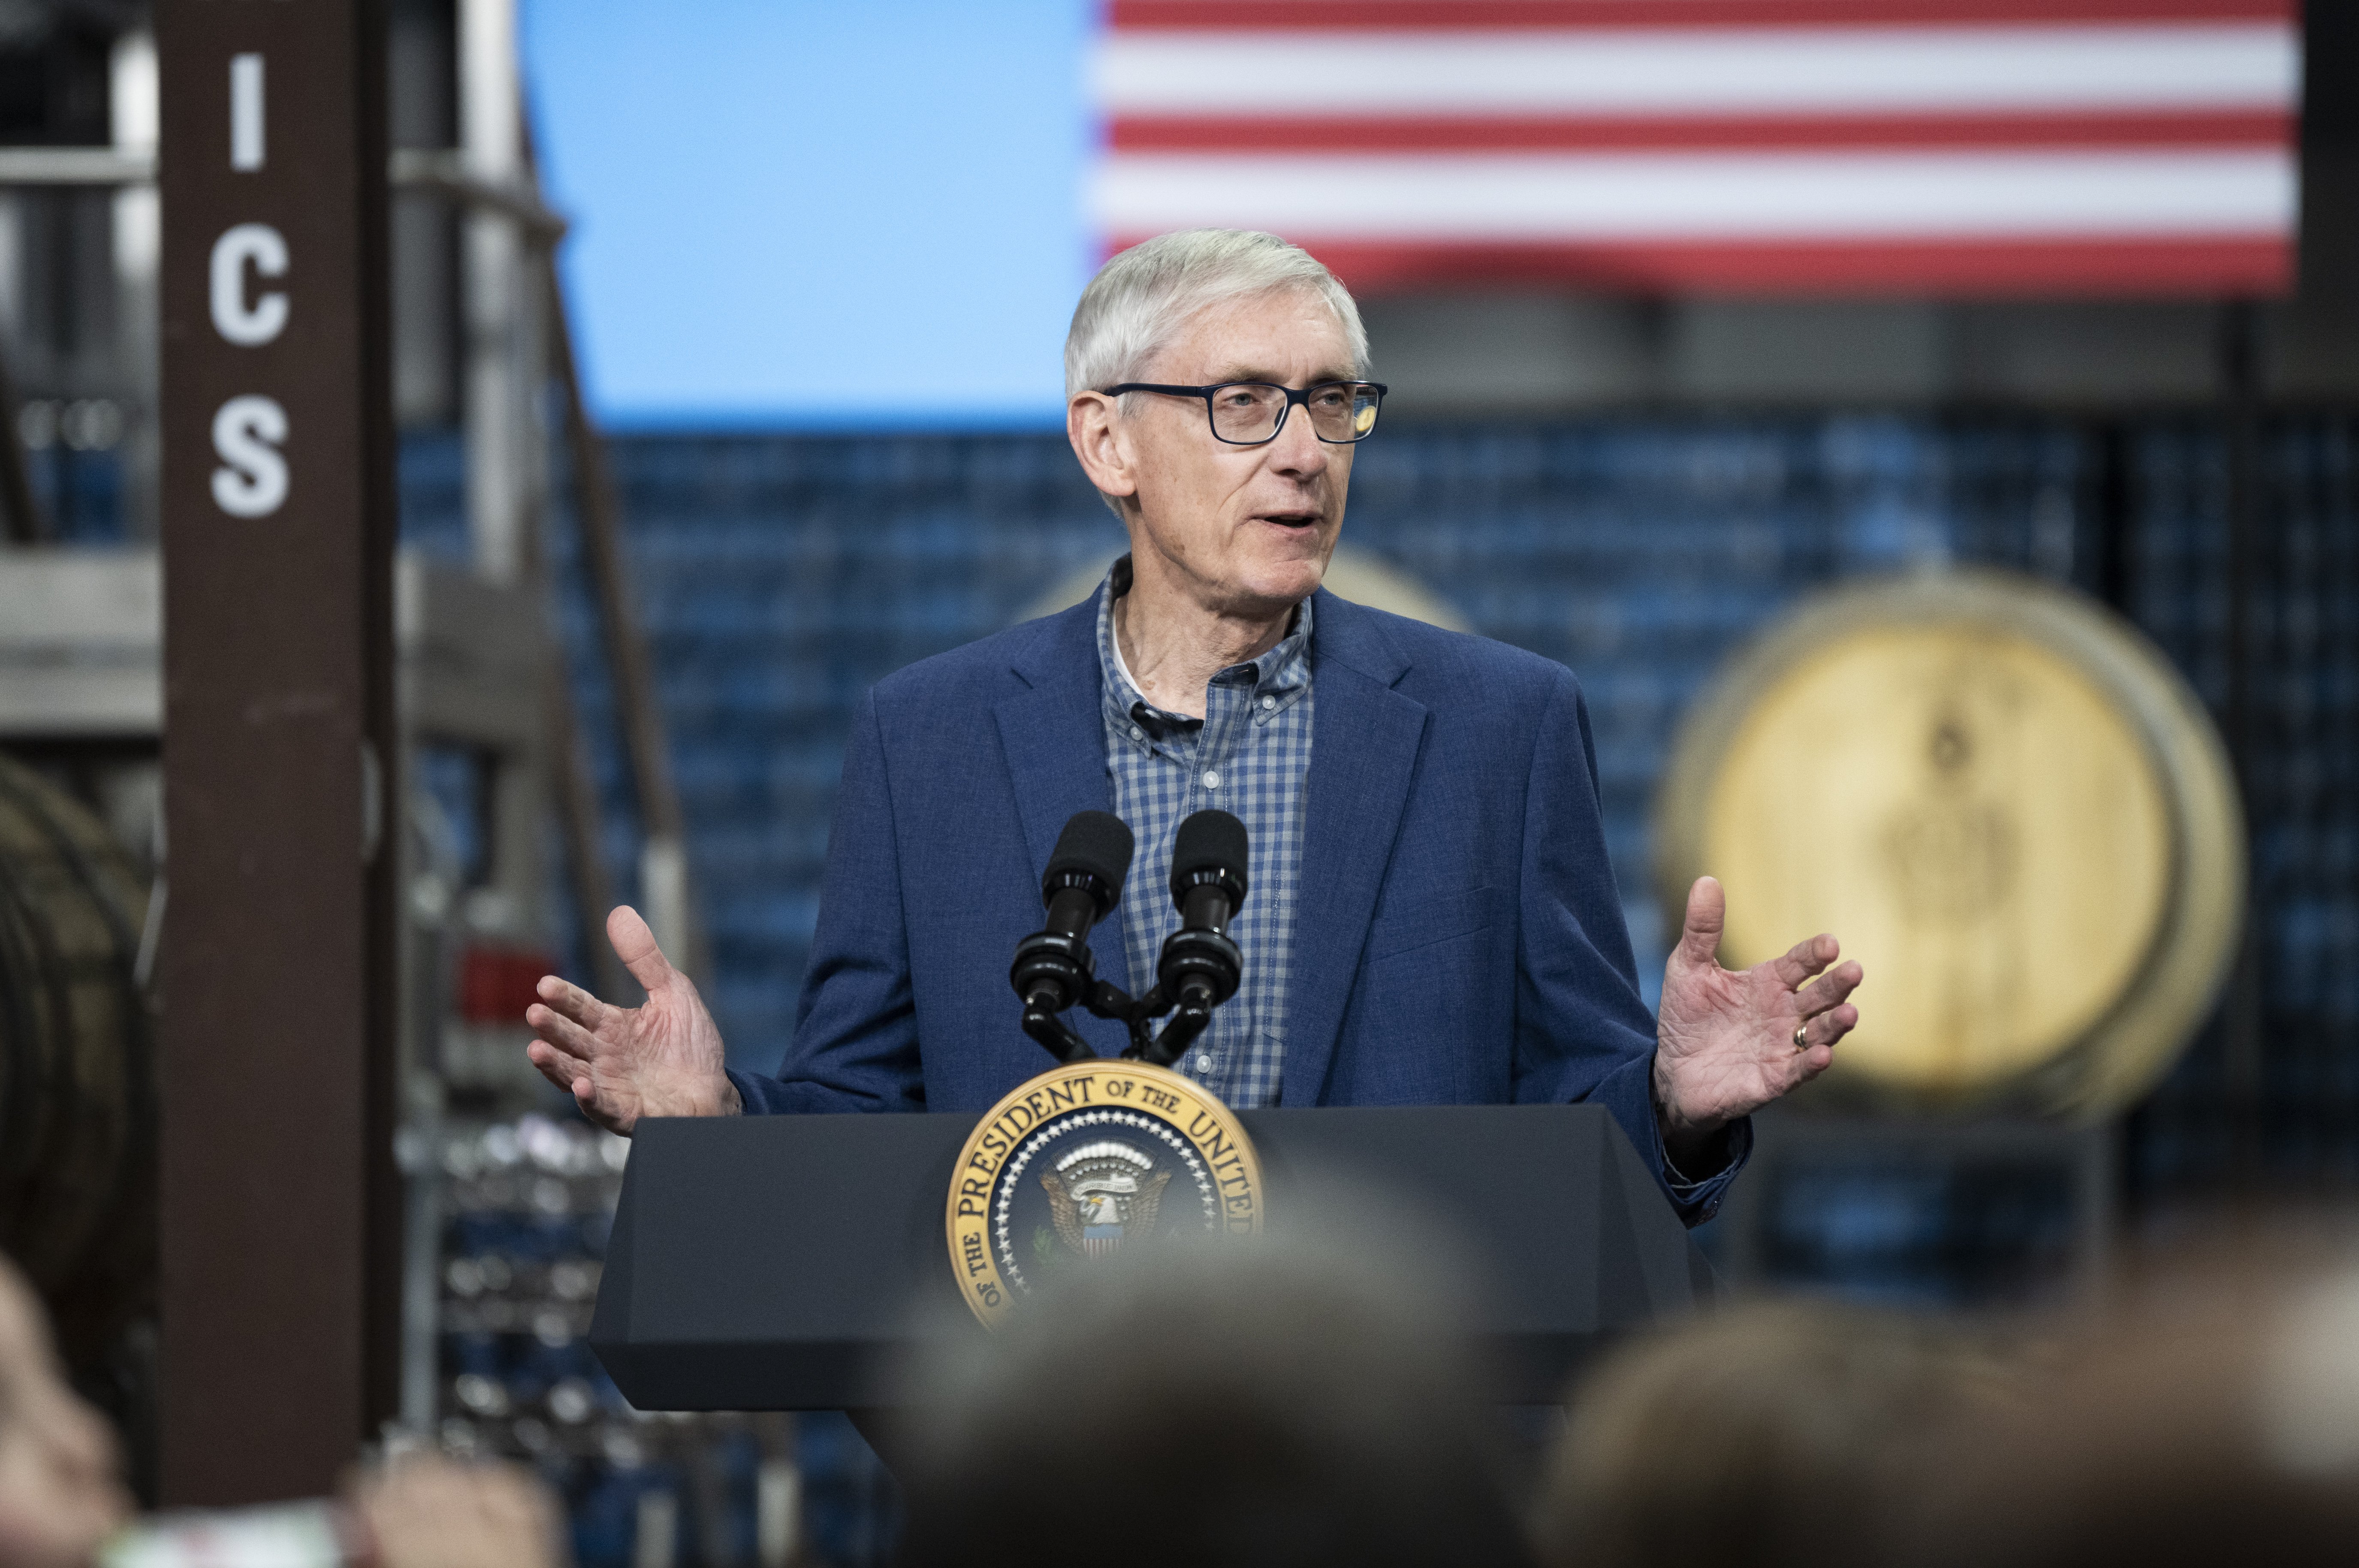 Tony Evers speaks at a lectern.